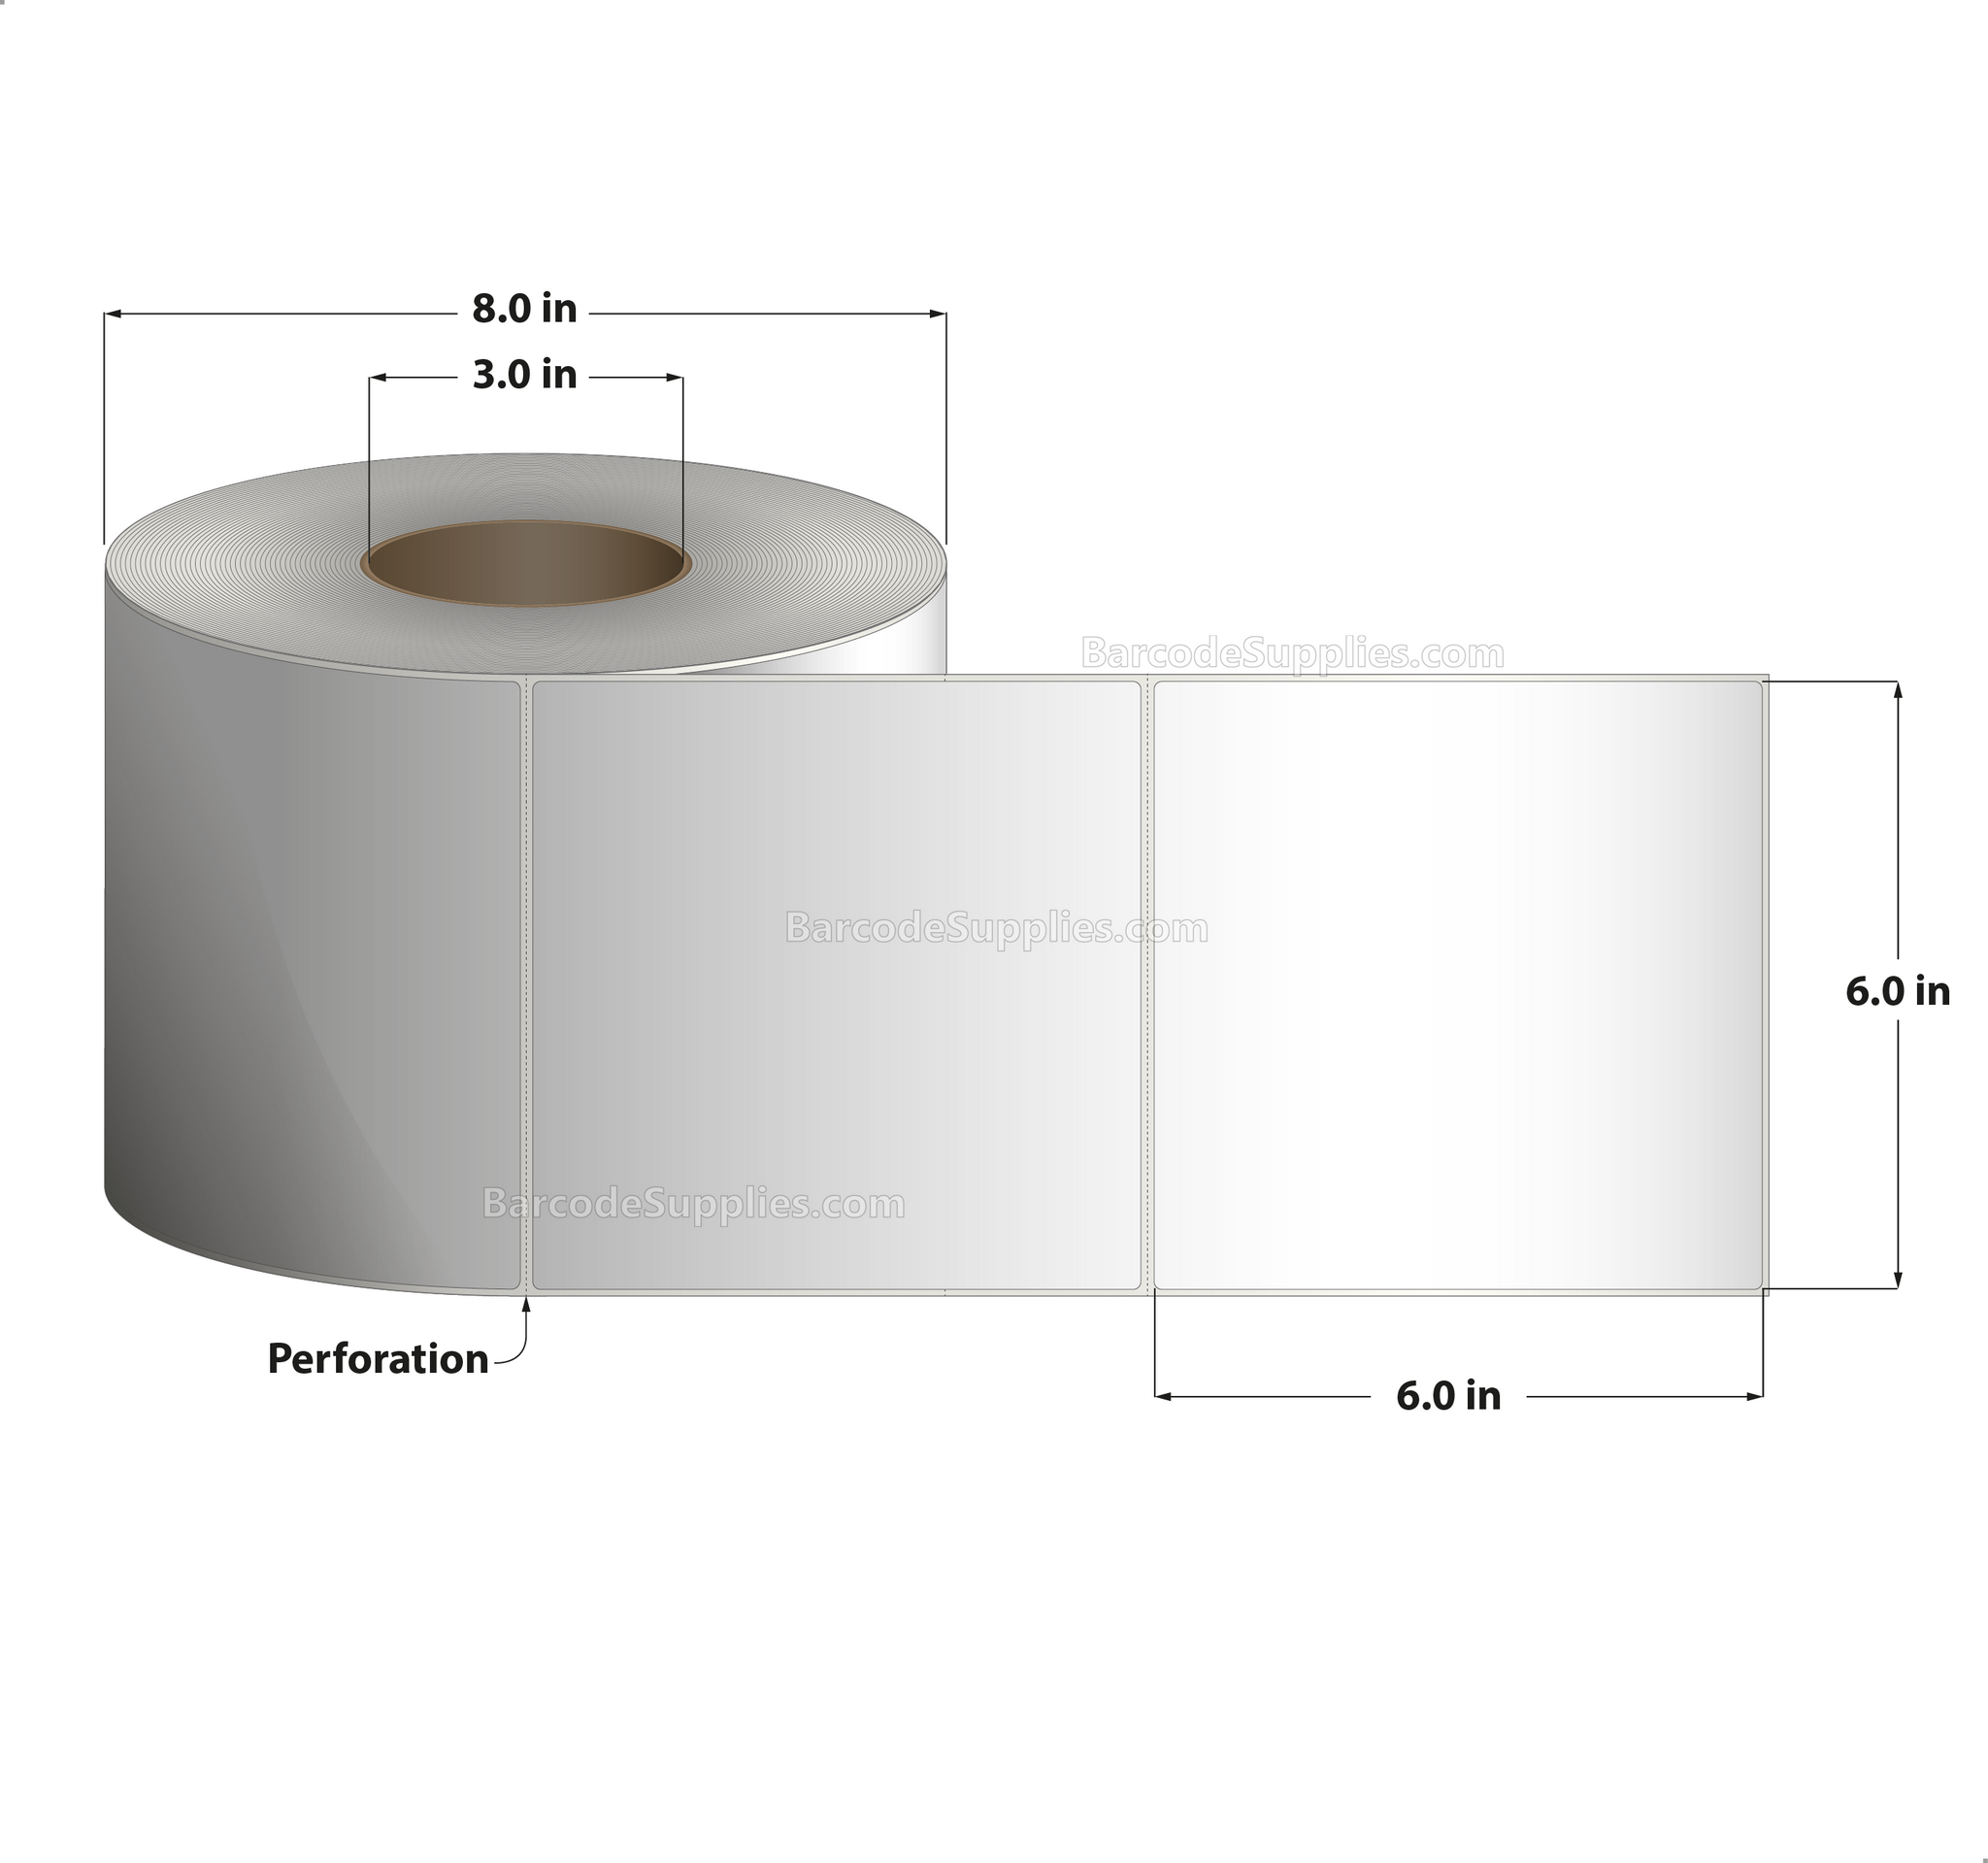 6 x 6 Thermal Transfer White Labels With Permanent Adhesive - Perforated - 1000 Labels Per Roll - Carton Of 4 Rolls - 4000 Labels Total - MPN: RT-6-6-1000-3